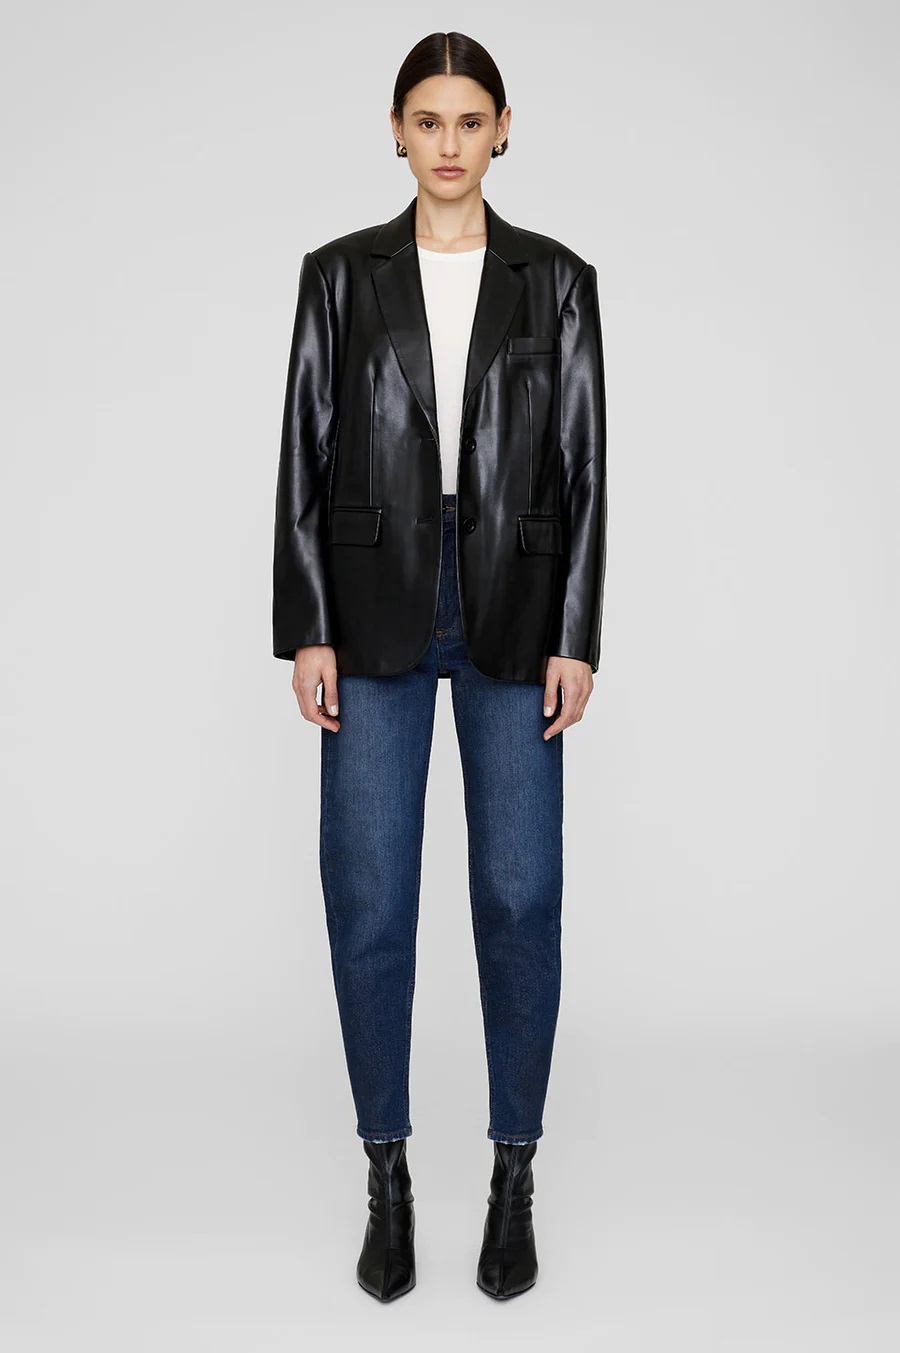 ANINE BING Classic Blazer in Black Recycled Leather M